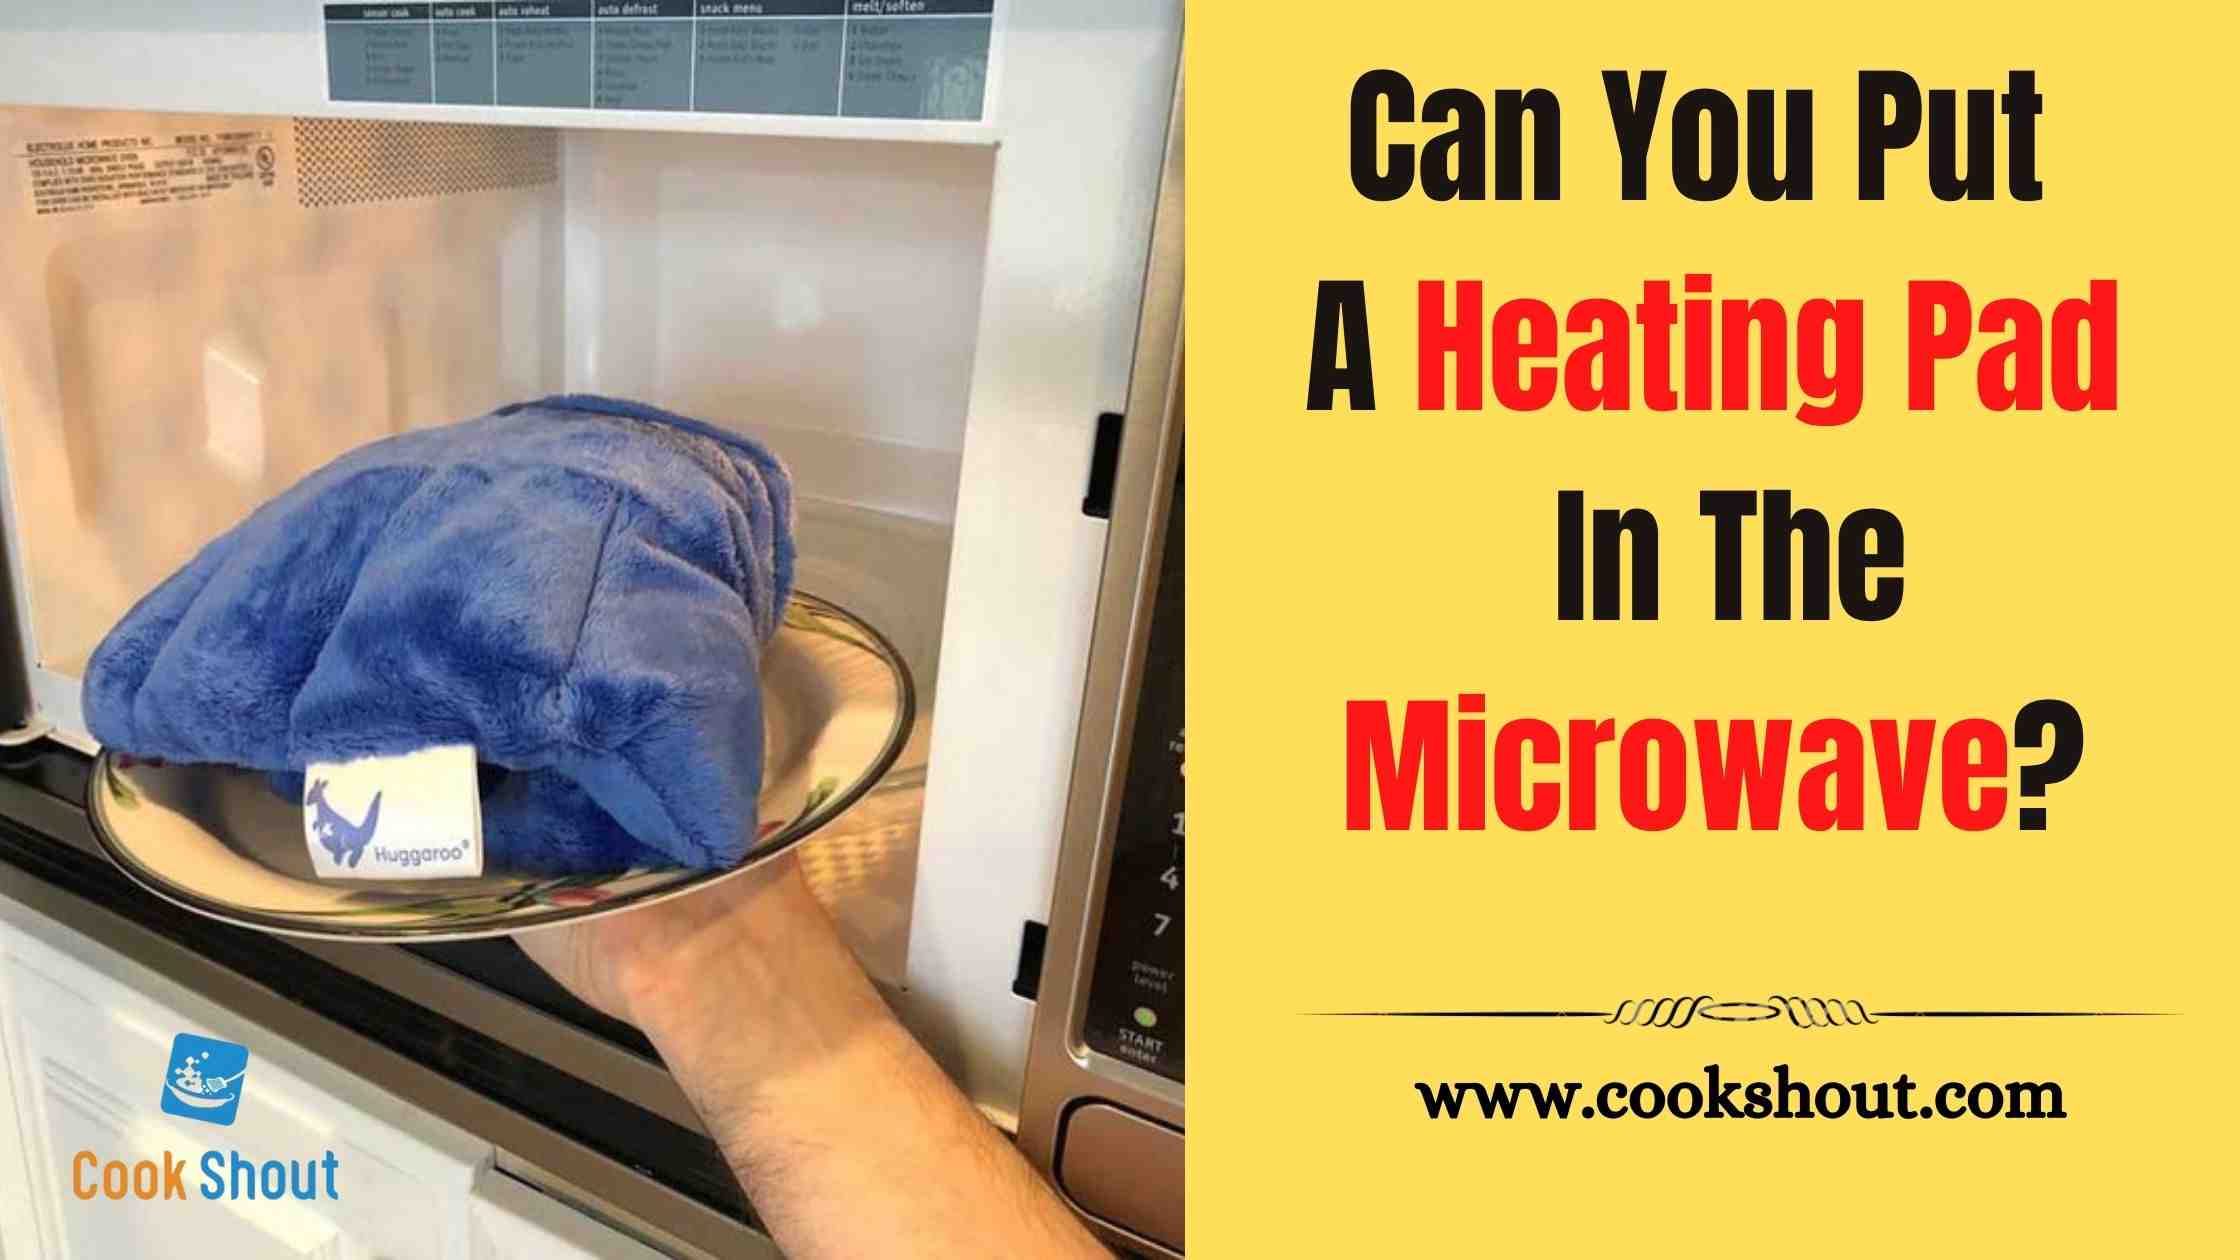 Can You Put A Heating Pad In The Microwave